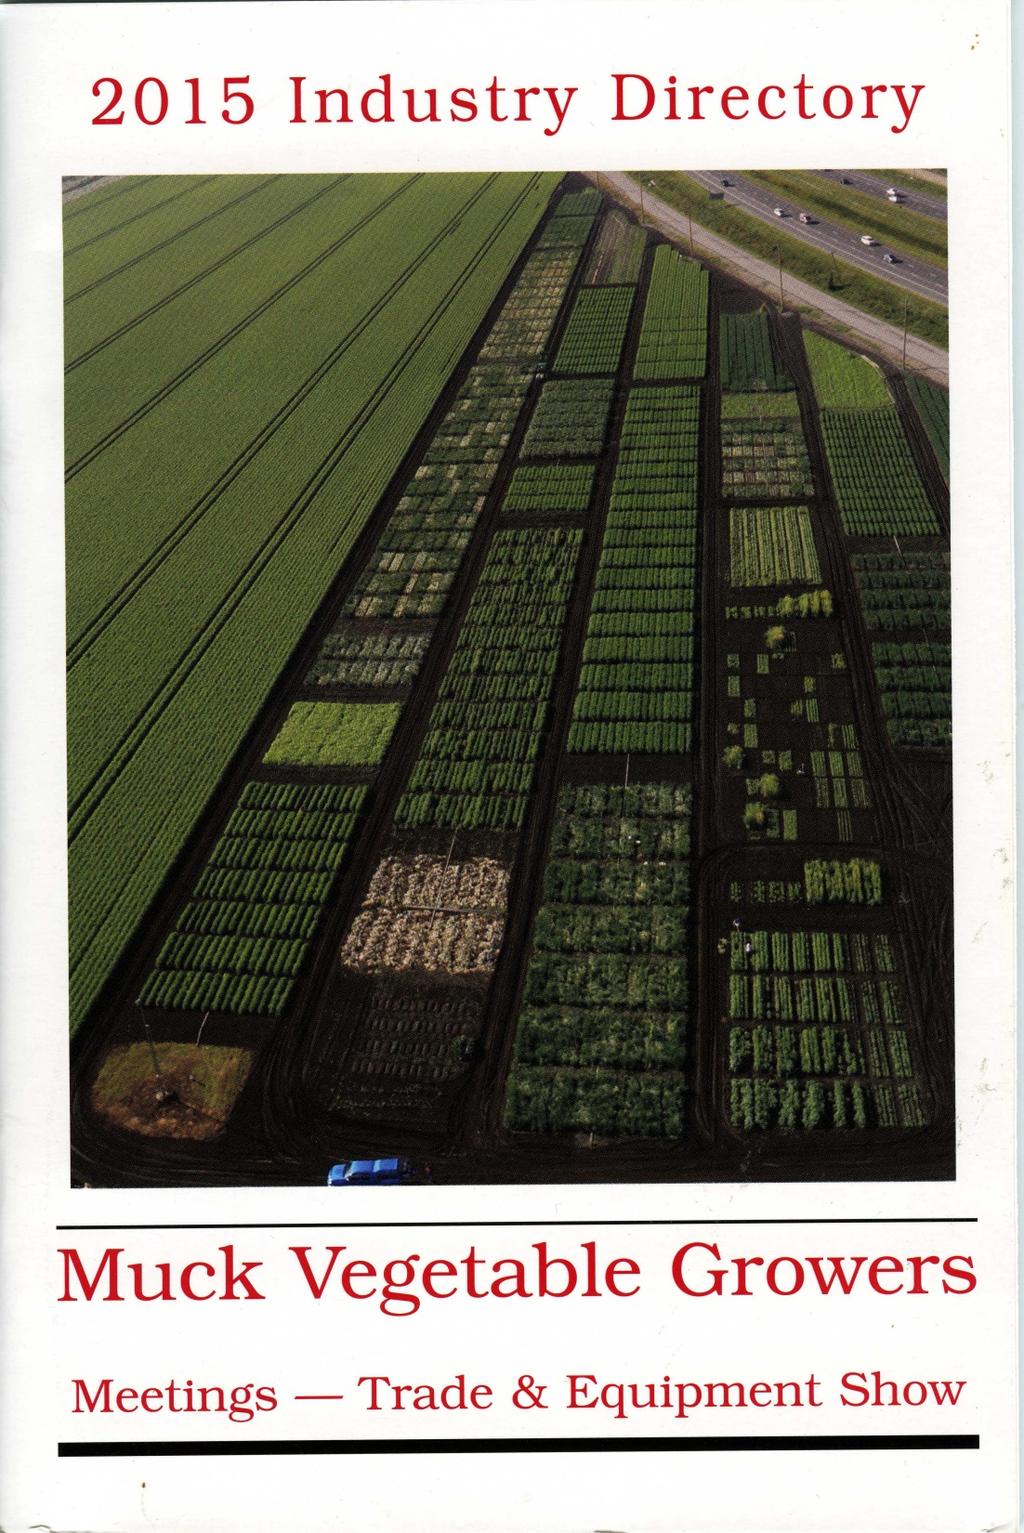 Annual Muck Vegetable Growers Conference: Bradford, Ontario, Canada